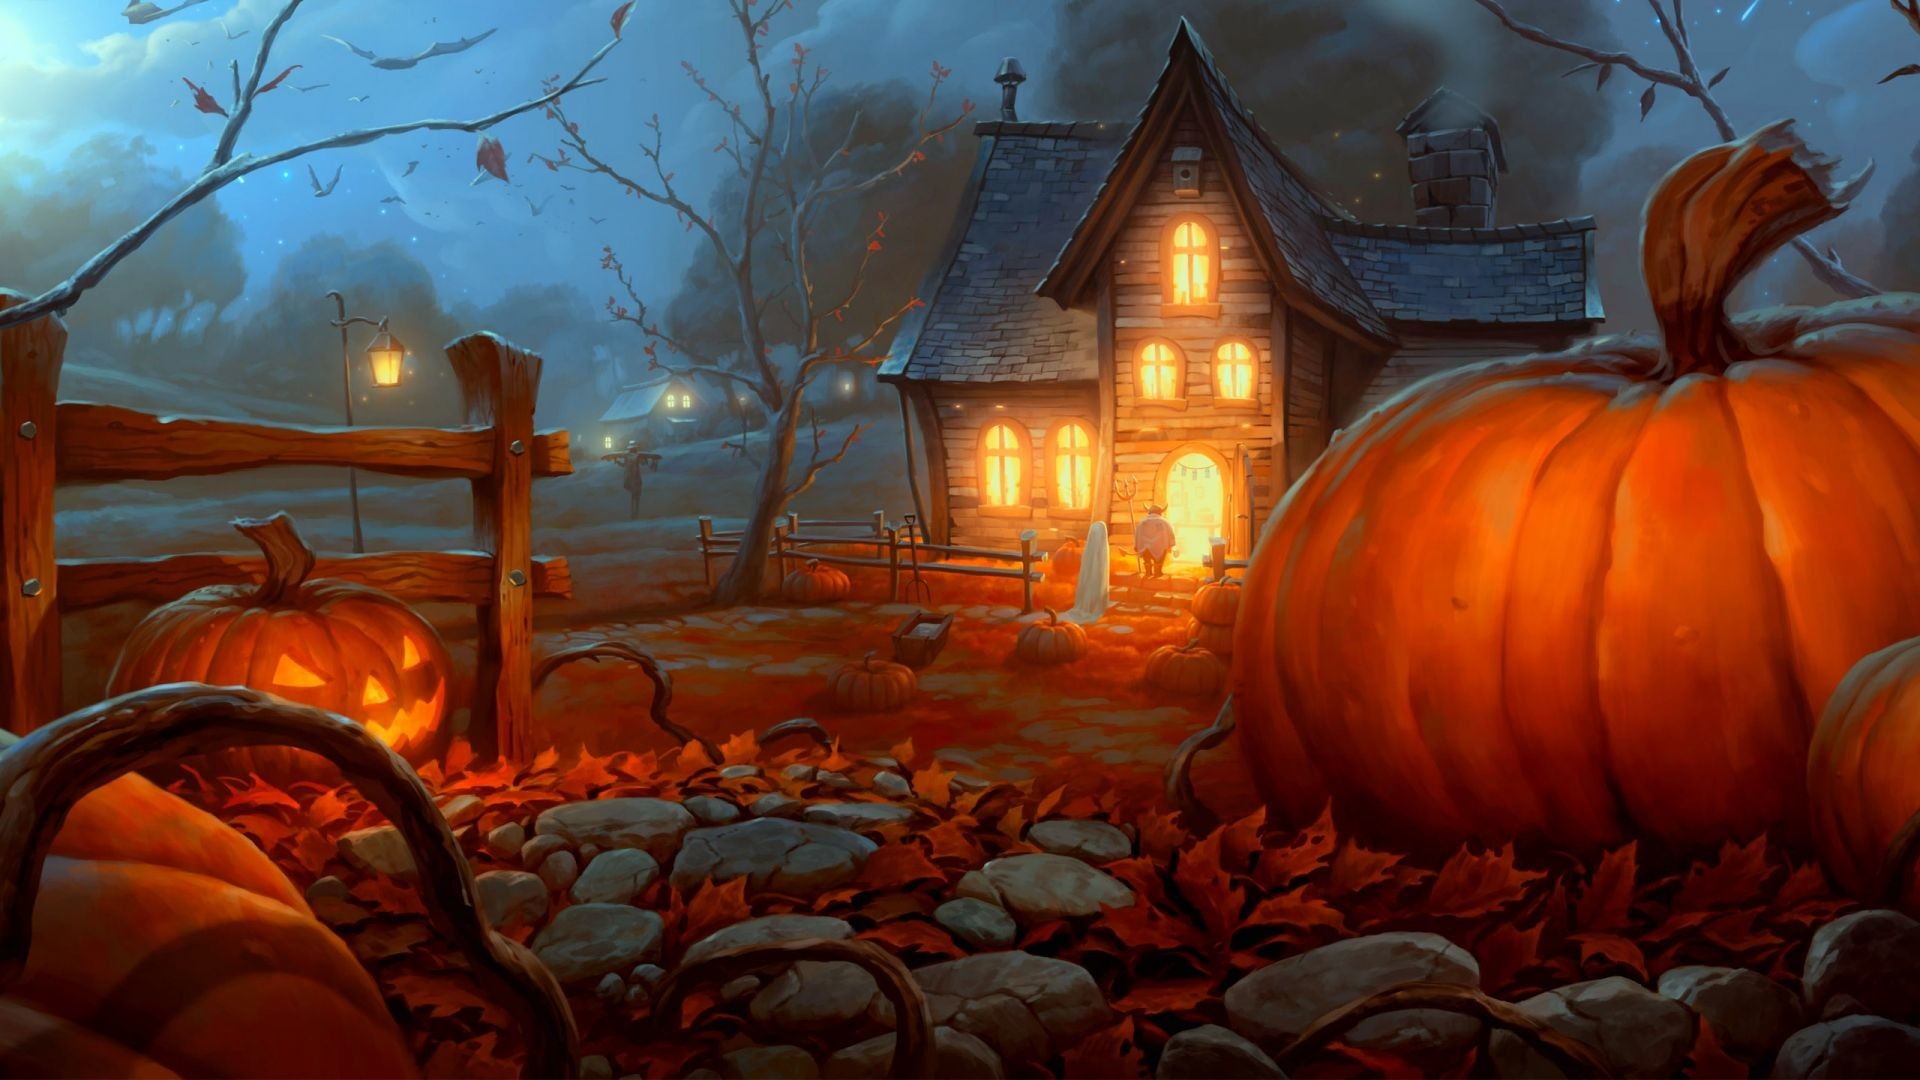 1920x1080 Free download Halloween Backgrounds.